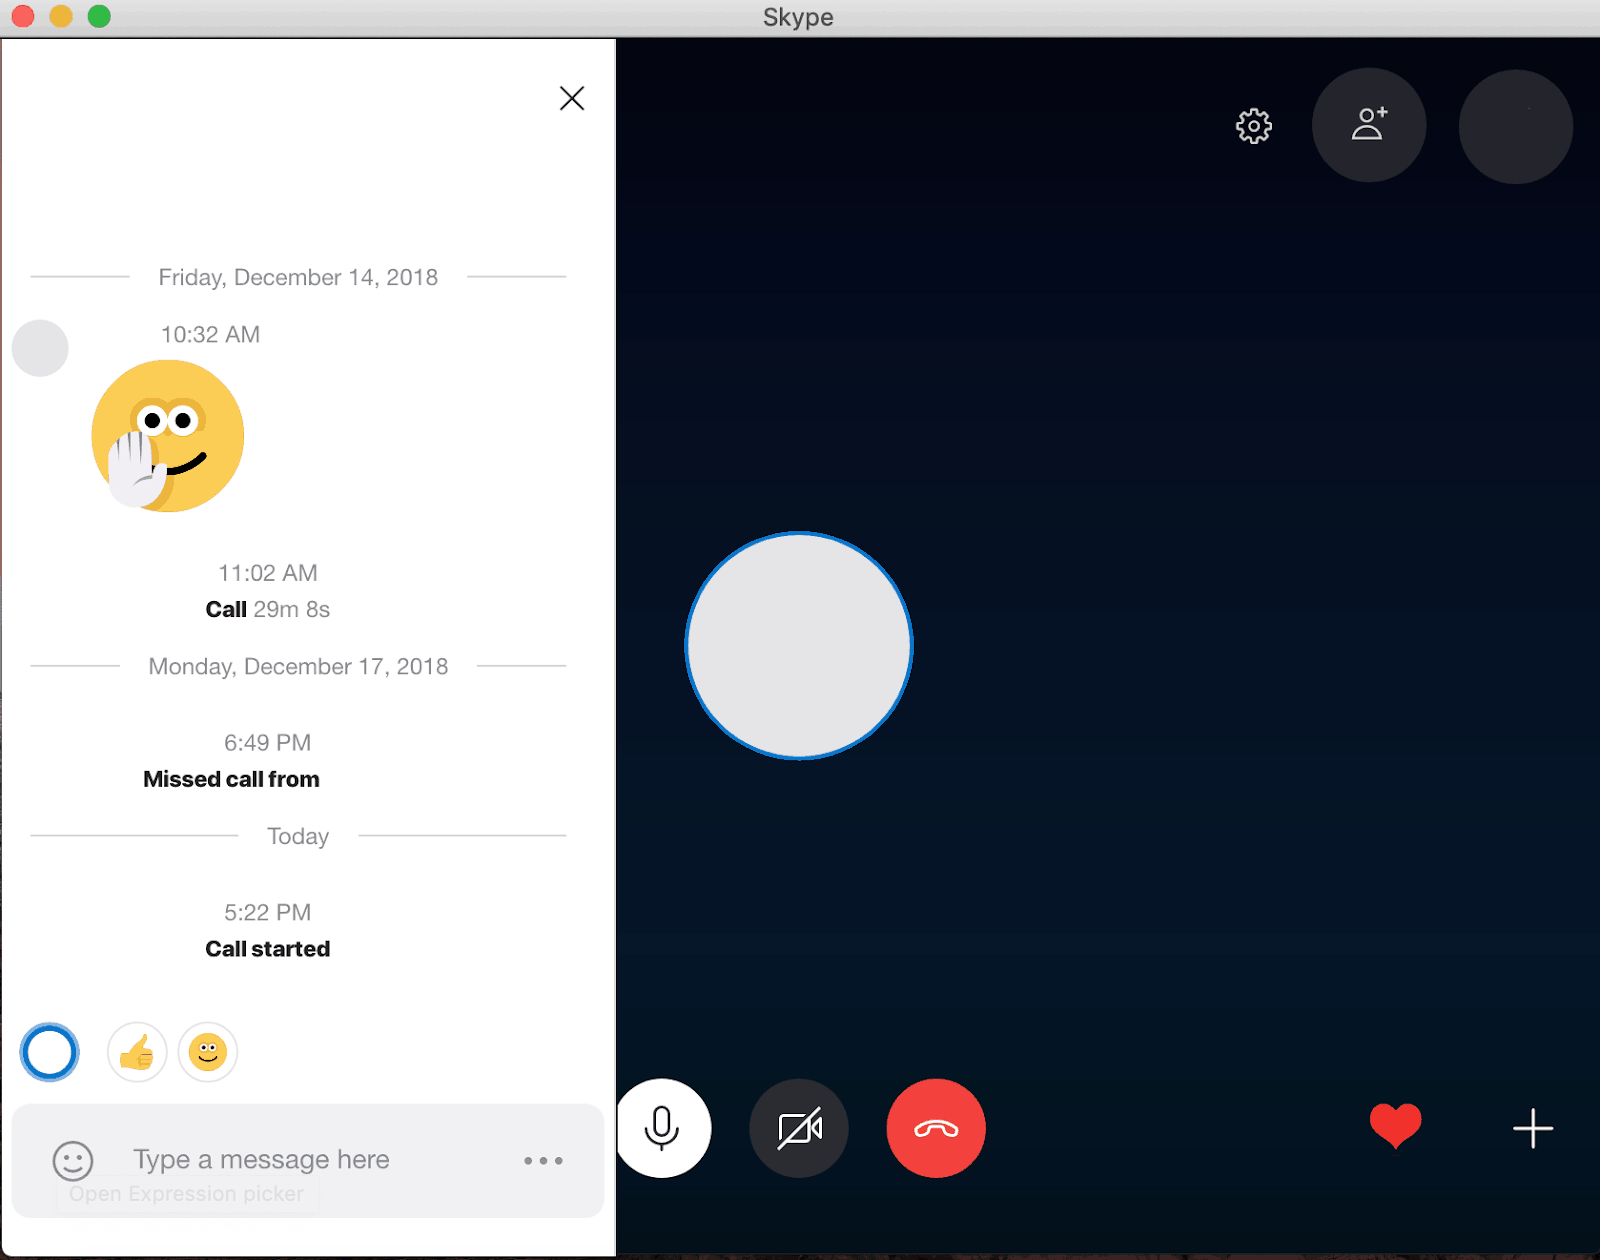 Skype chat window during call 